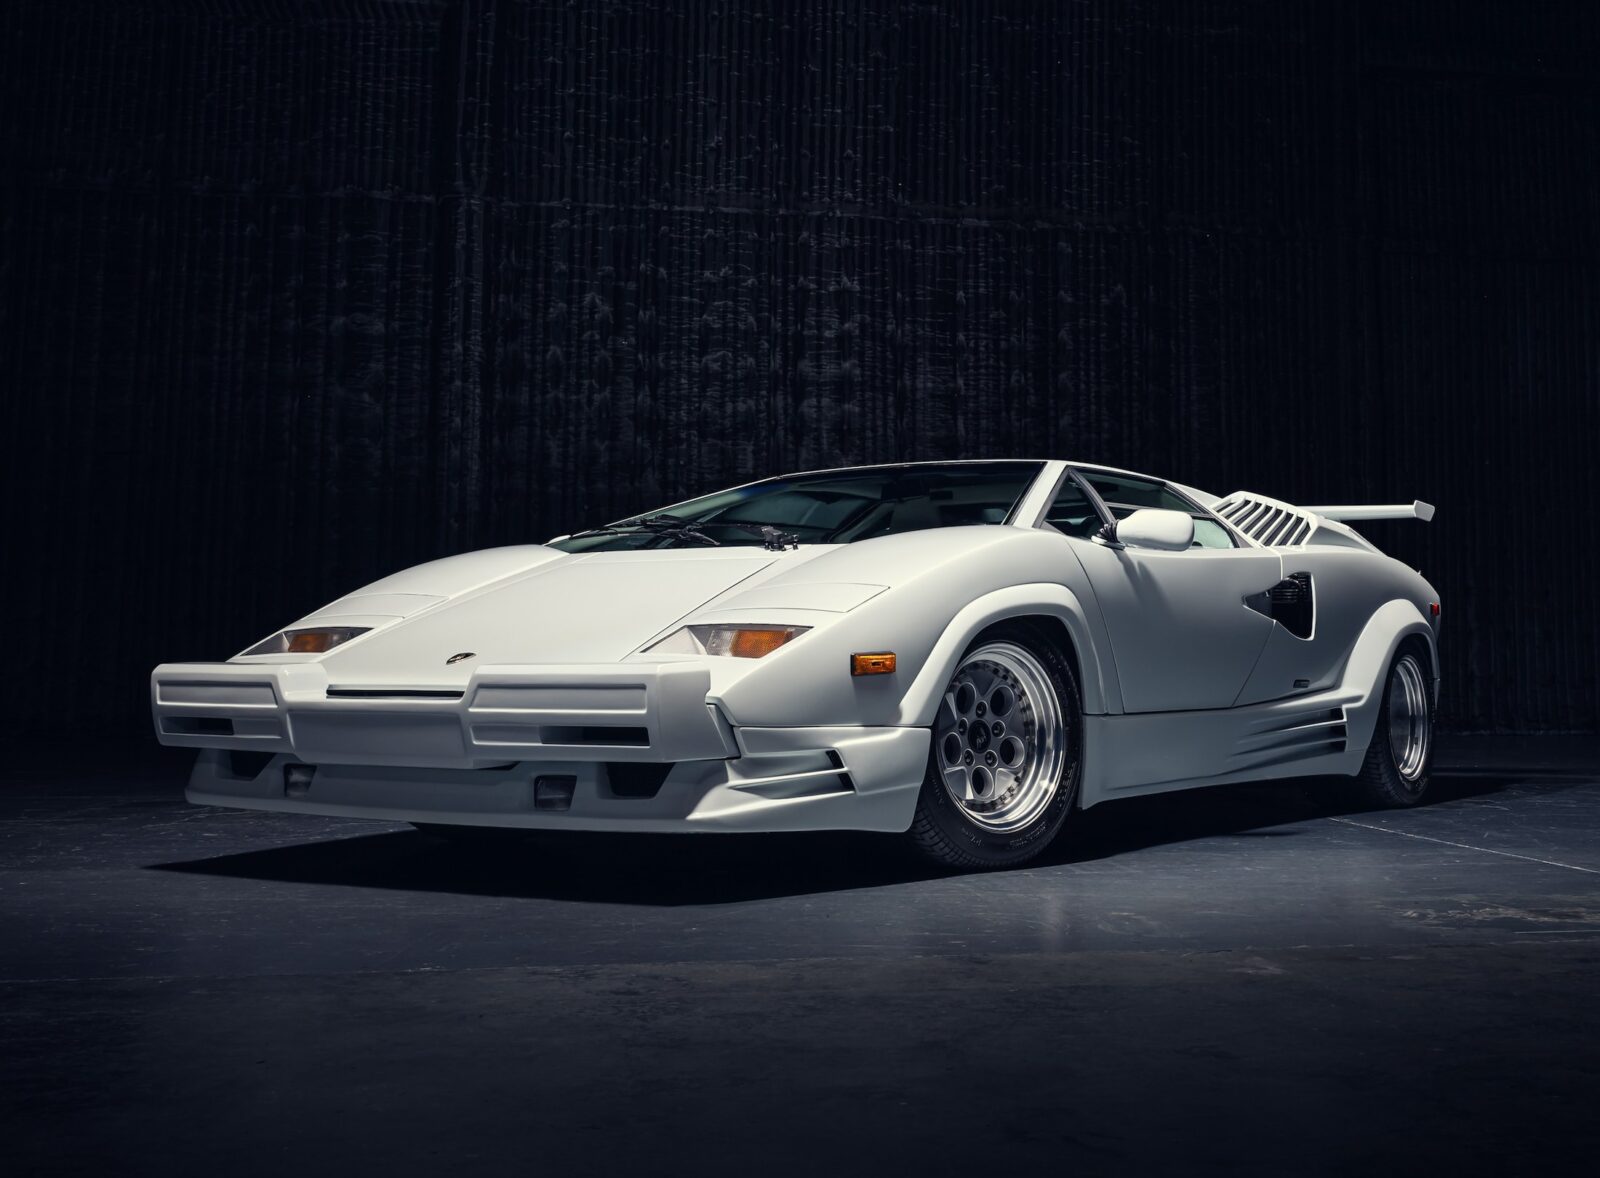 Lamborghini Countach 25th Anniversary Edition From The Wolf of Wall Street 5